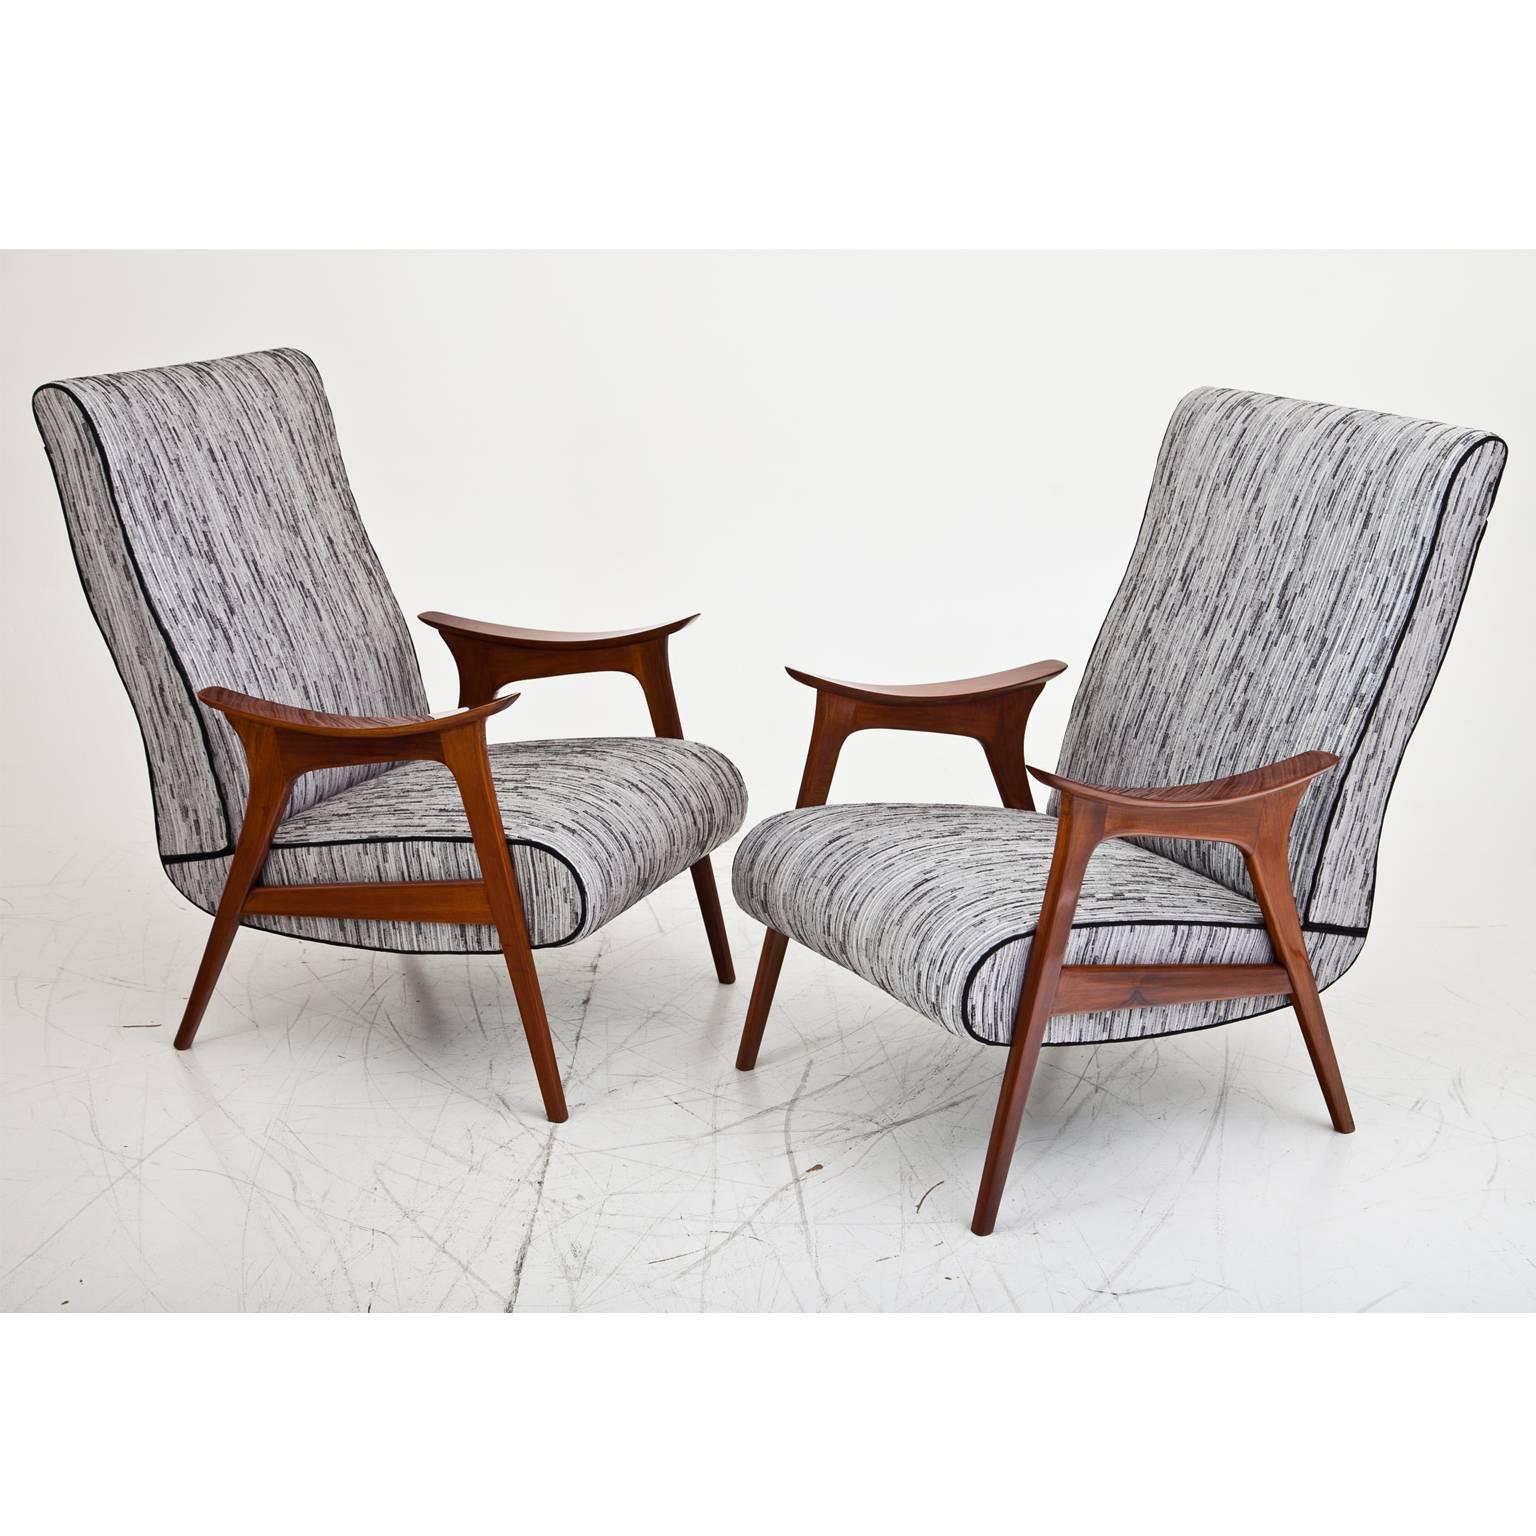 Pair of armchairs with very beautiful slightly curved armrests and large backrests. The chairs are completely restored and upholstered with a new, high quality fabric.